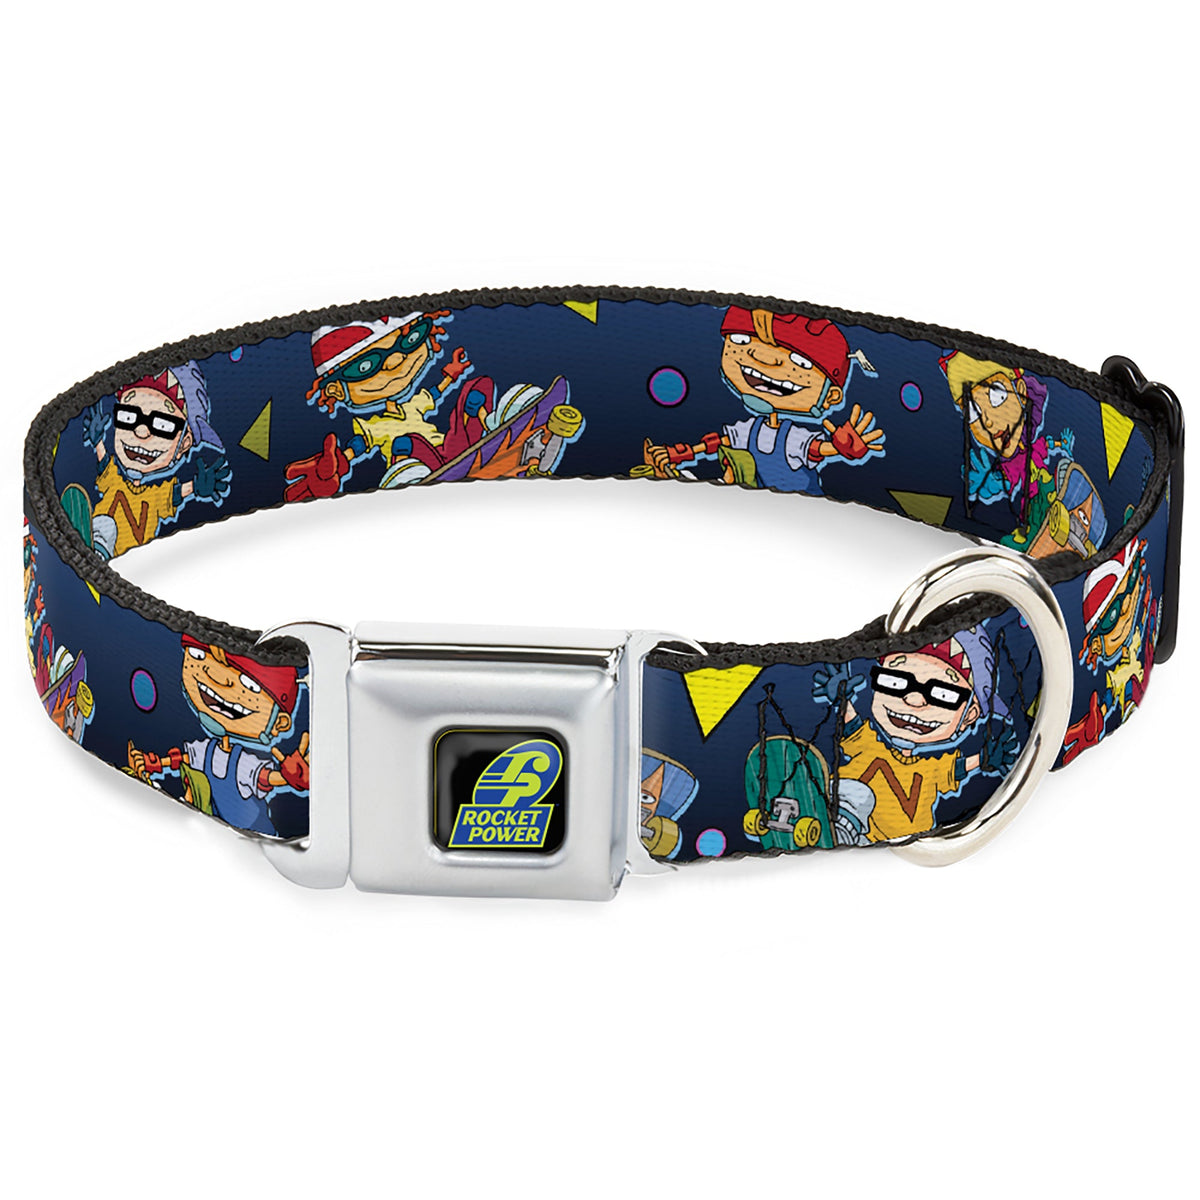 ROCKET POWER RP Logo Full Color Black/Green/Blue Seatbelt Buckle Collar - Rocket Power 4-Character Action Poses/Shapes Cool Gray/Multi Color